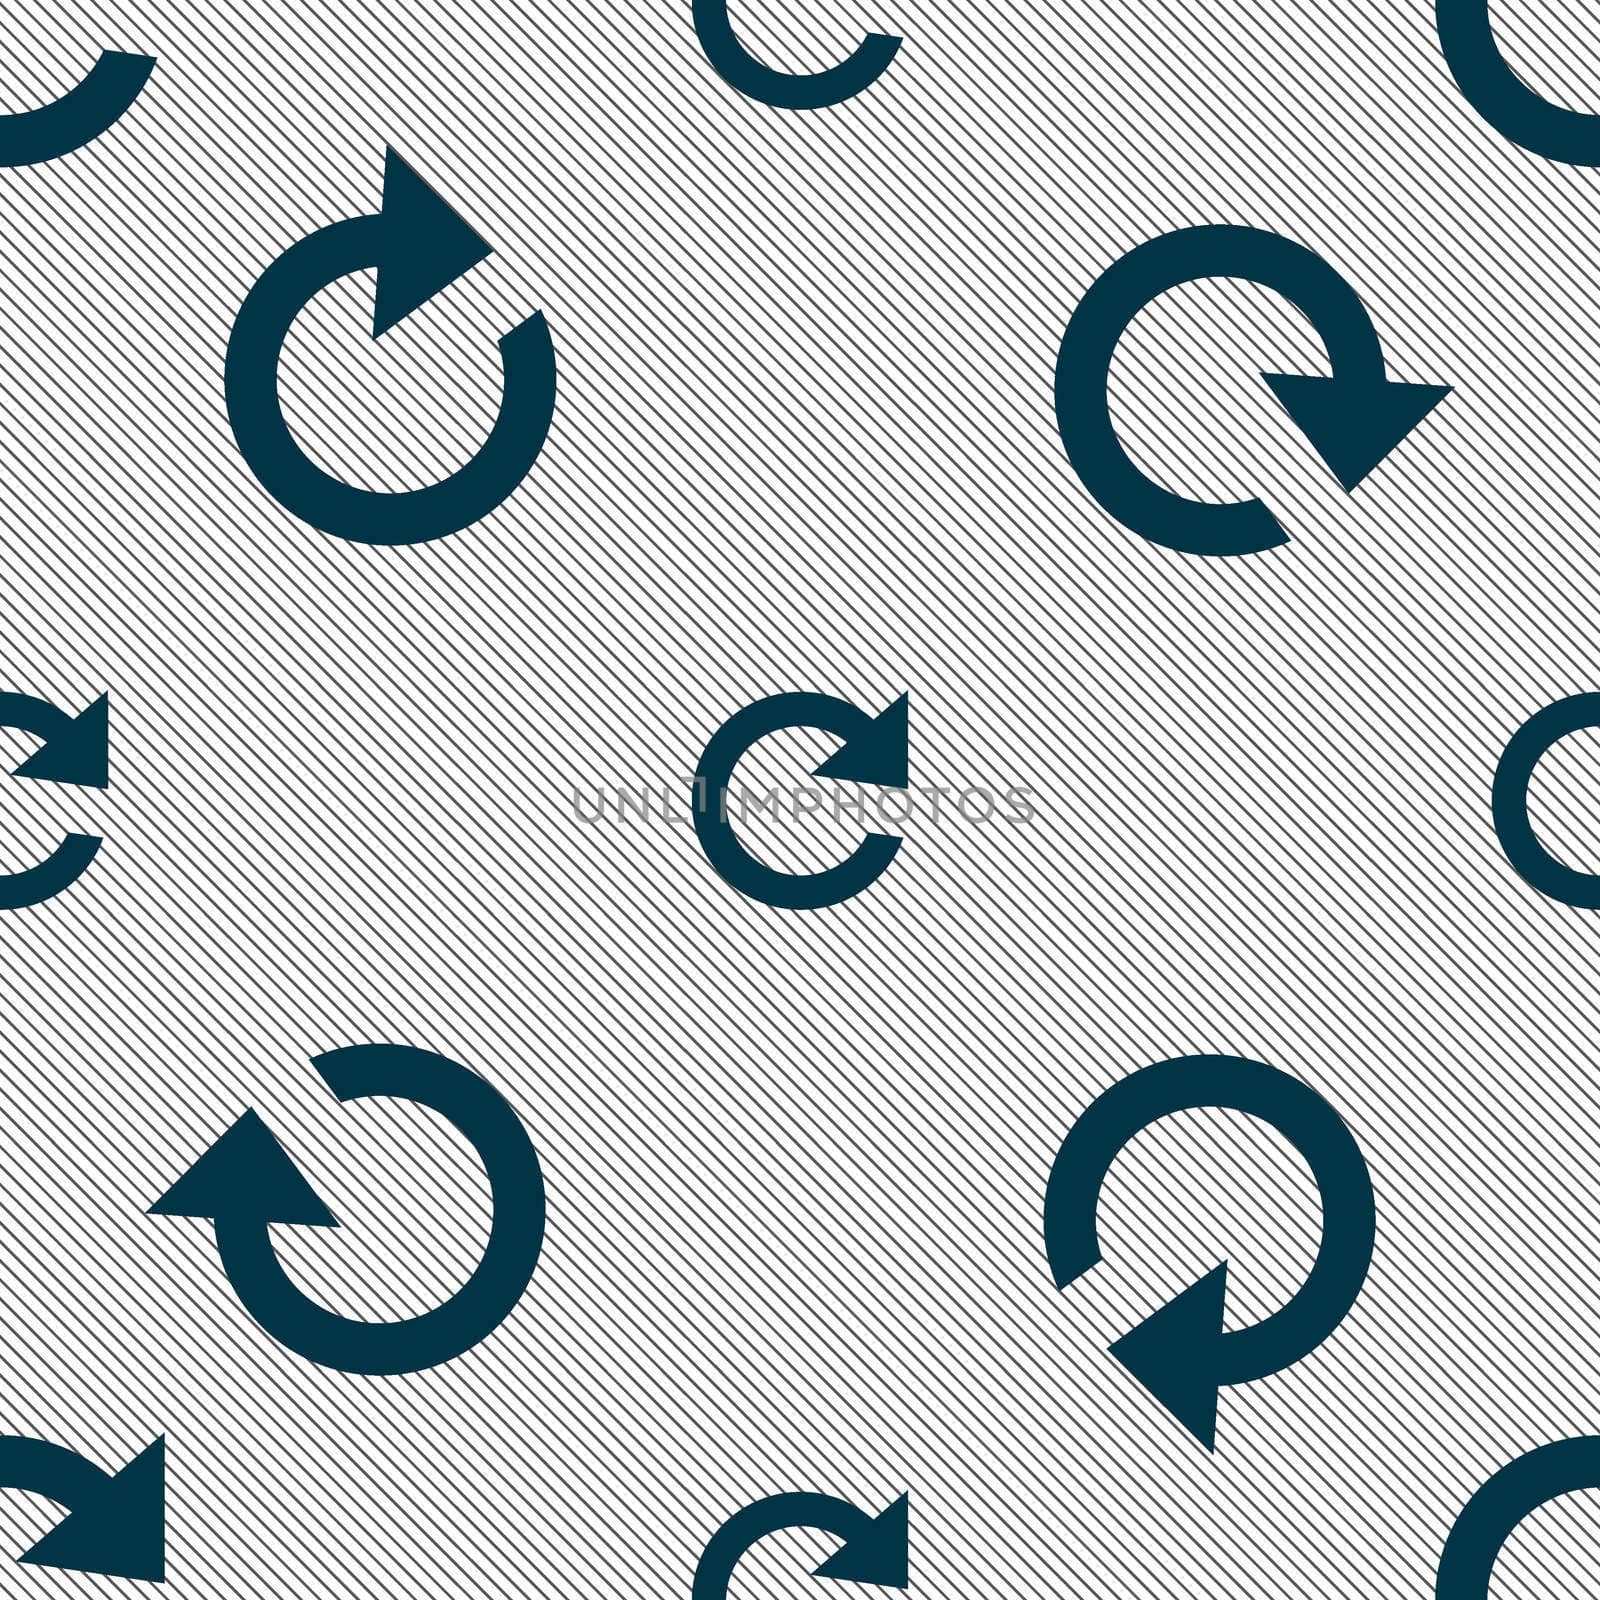 update sign icon. Full rotation arrow symbol. Seamless pattern with geometric texture. illustration